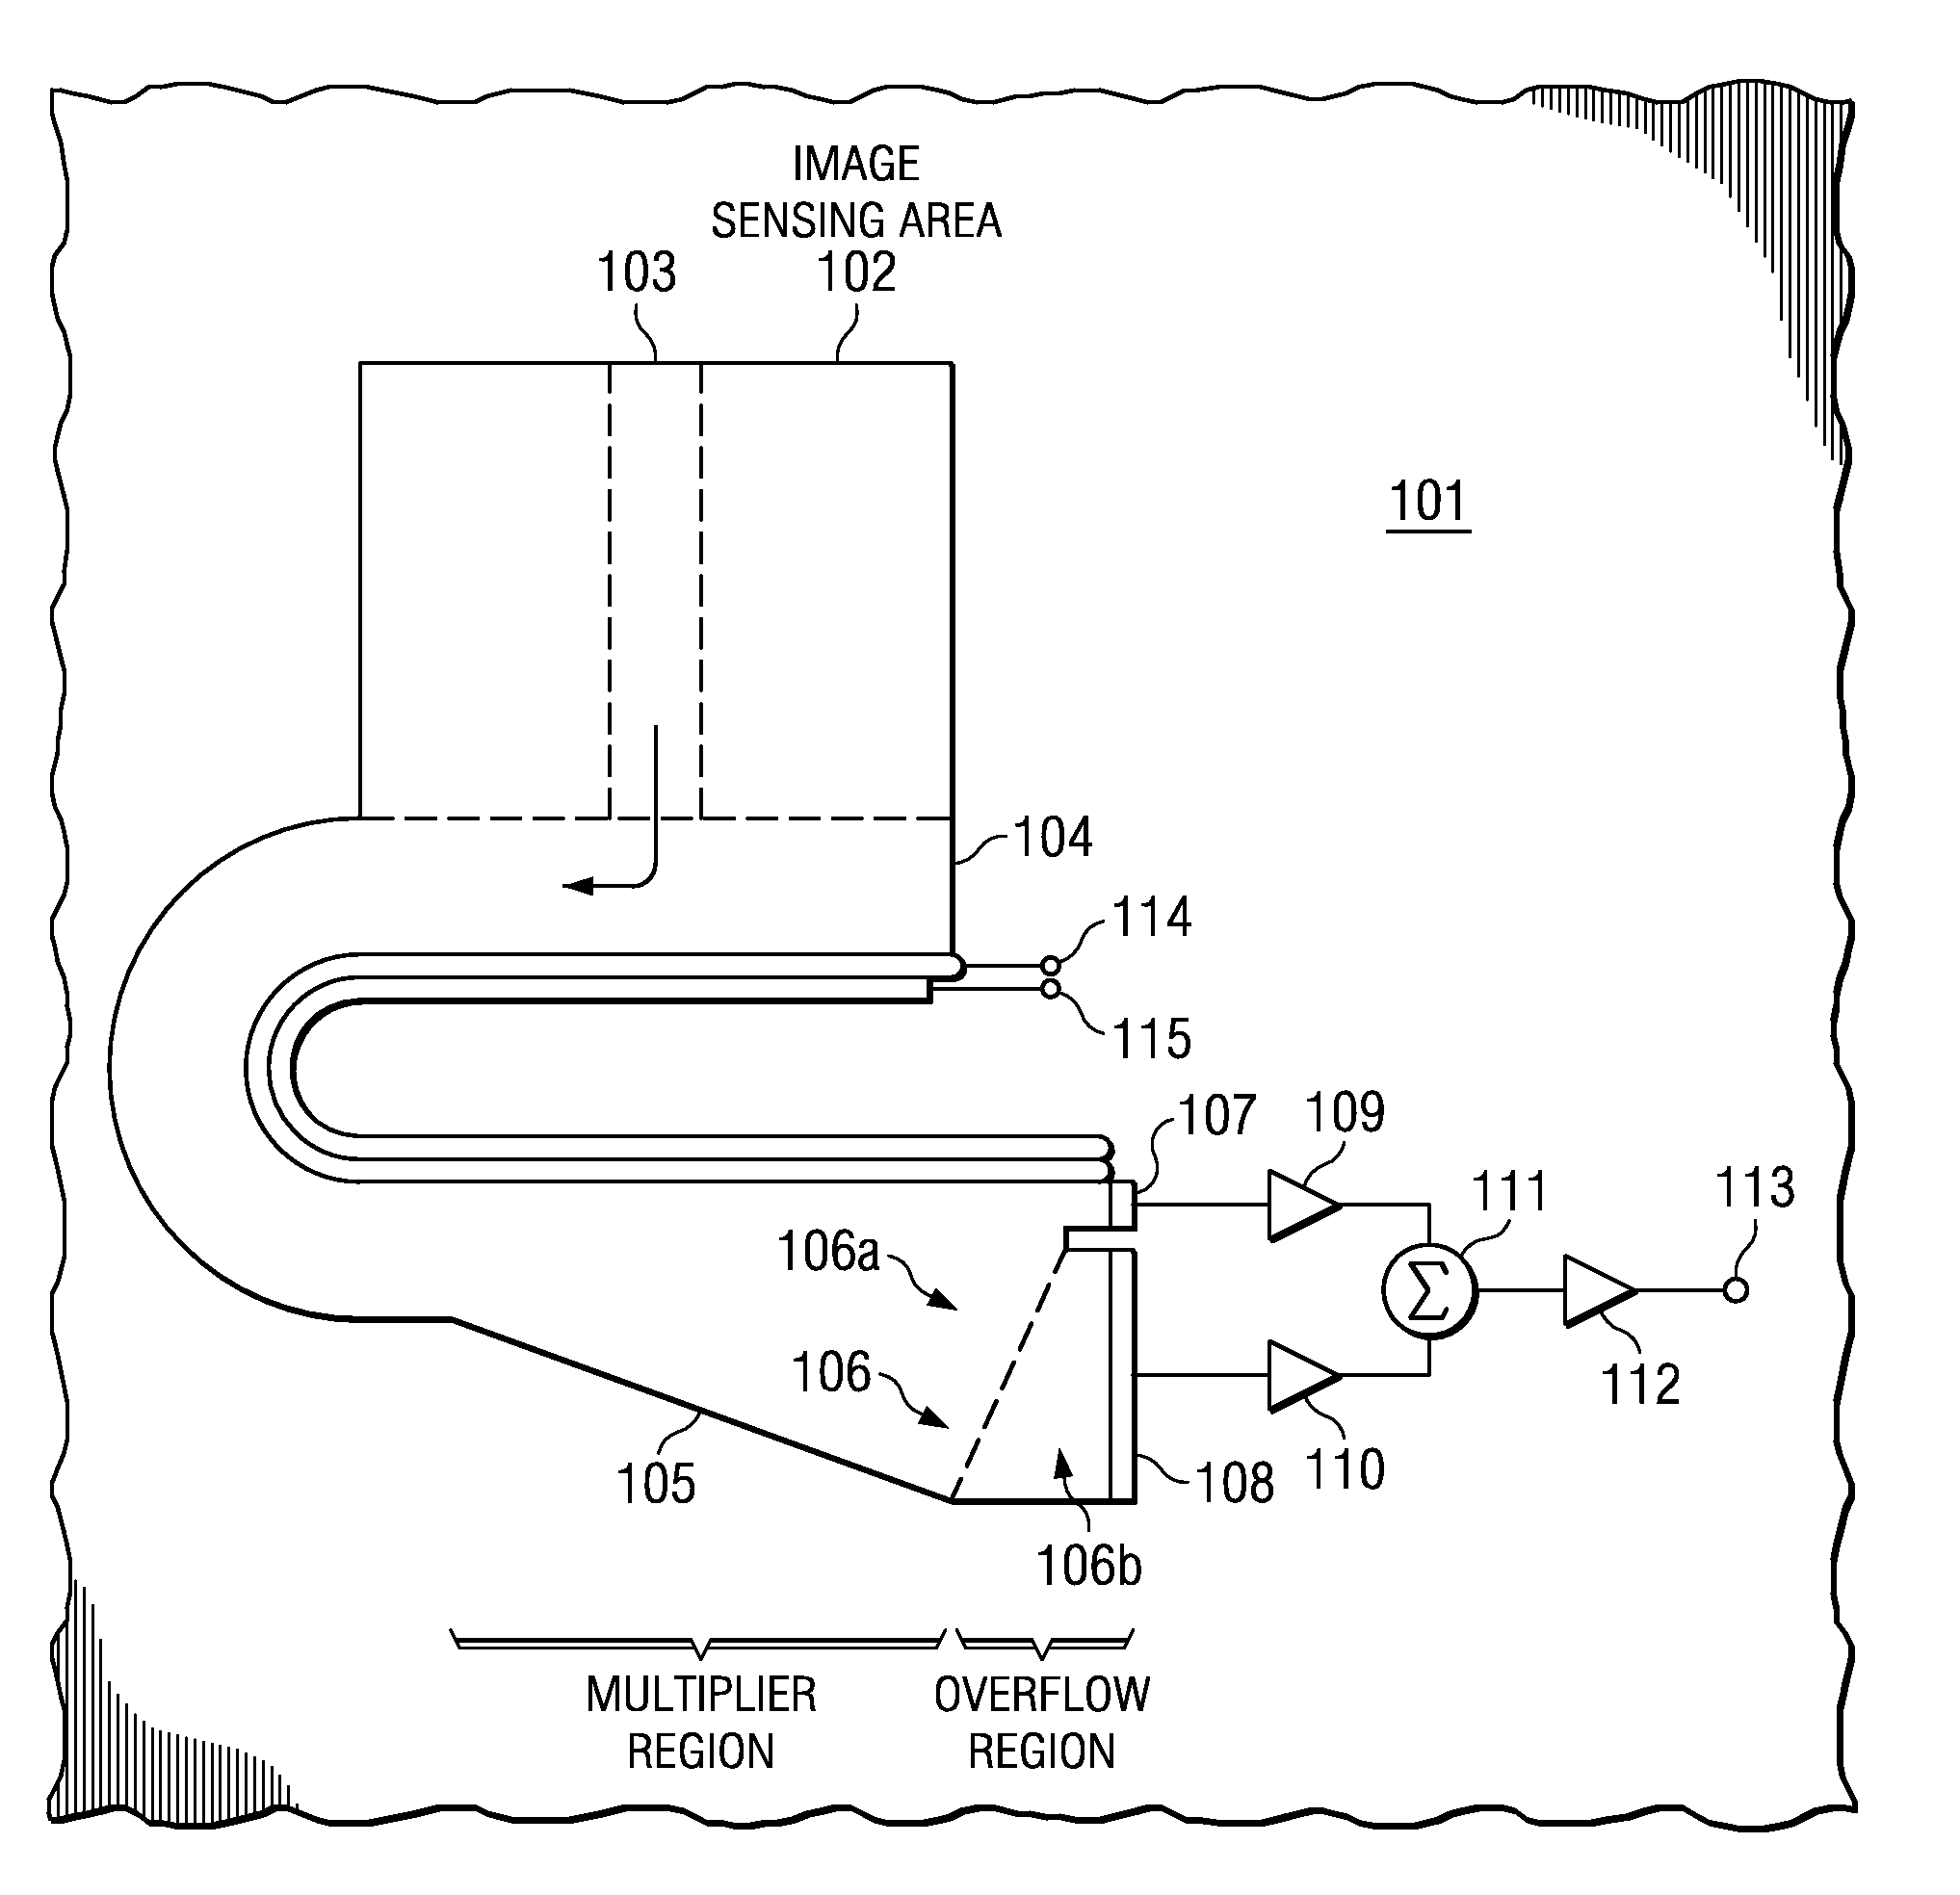 High dynamic range charge readout system